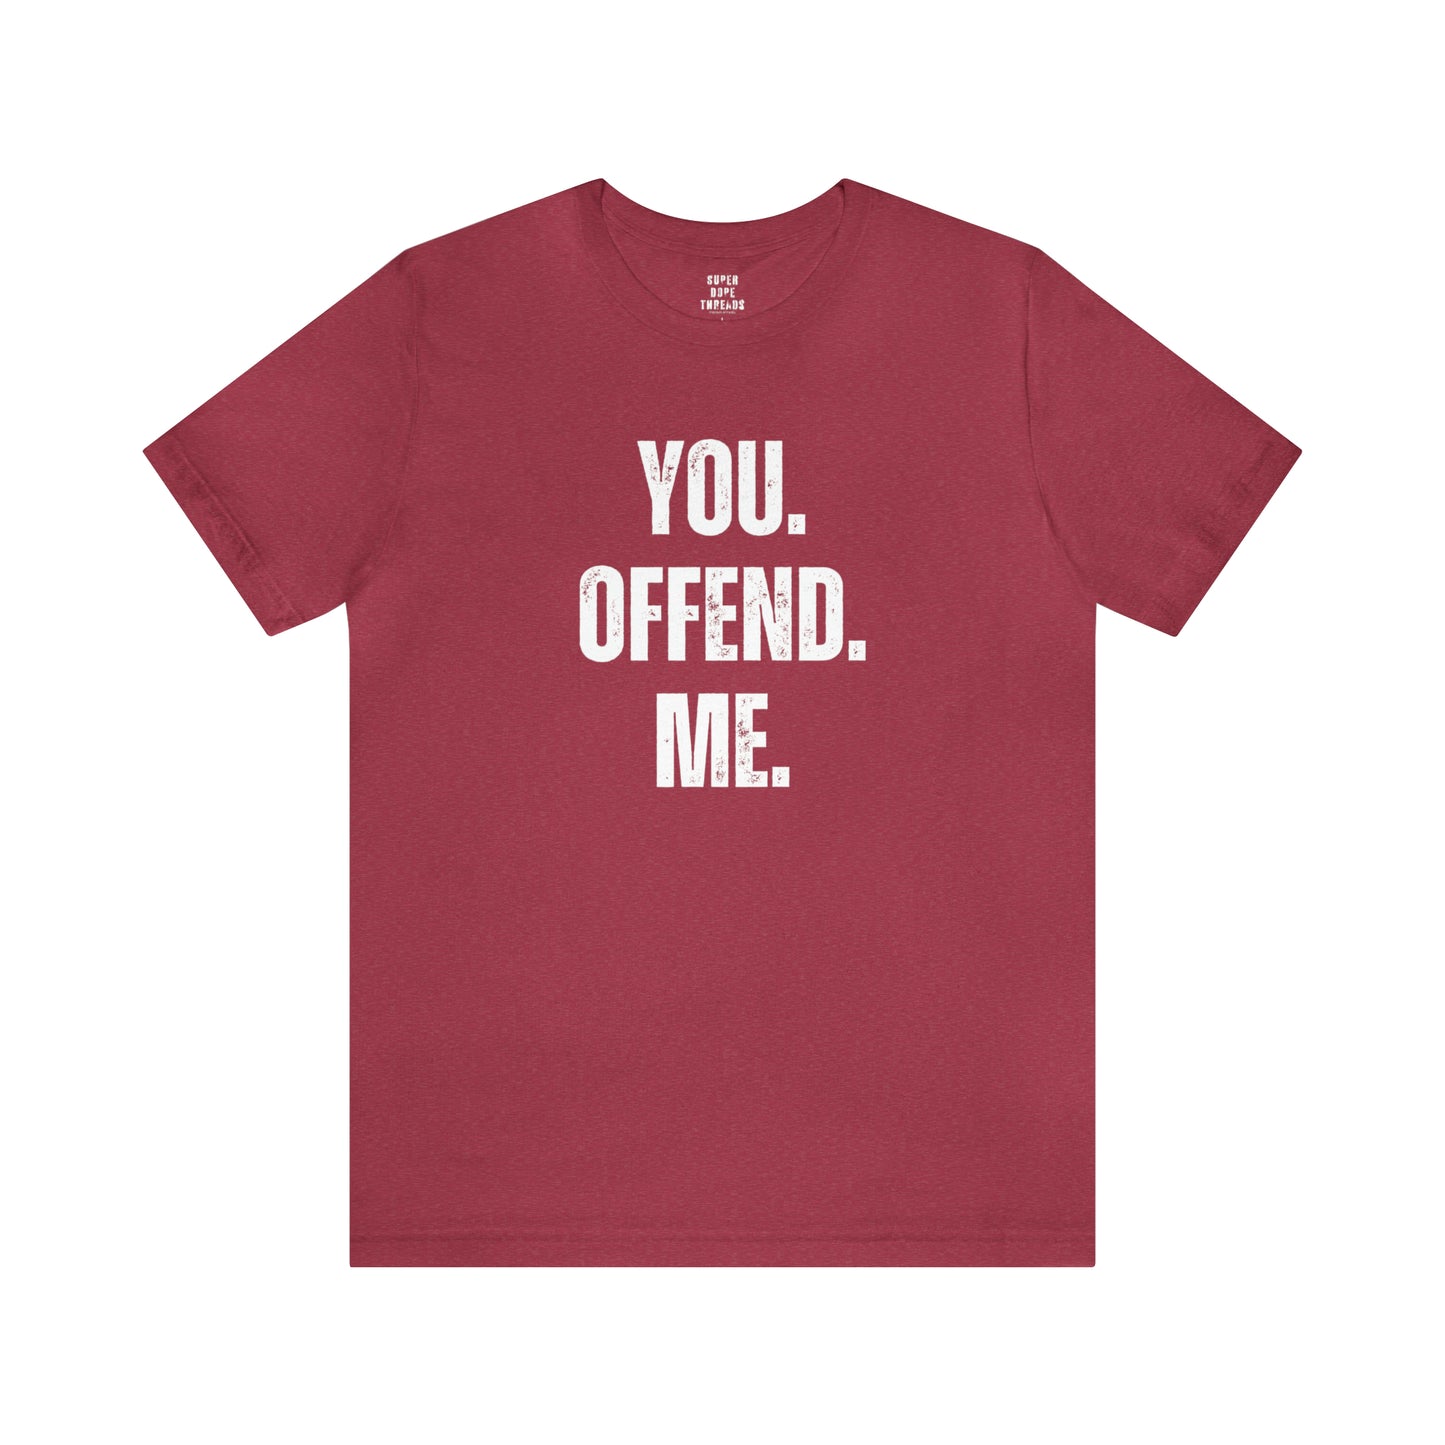 Super Dope Threads - You Offend Me